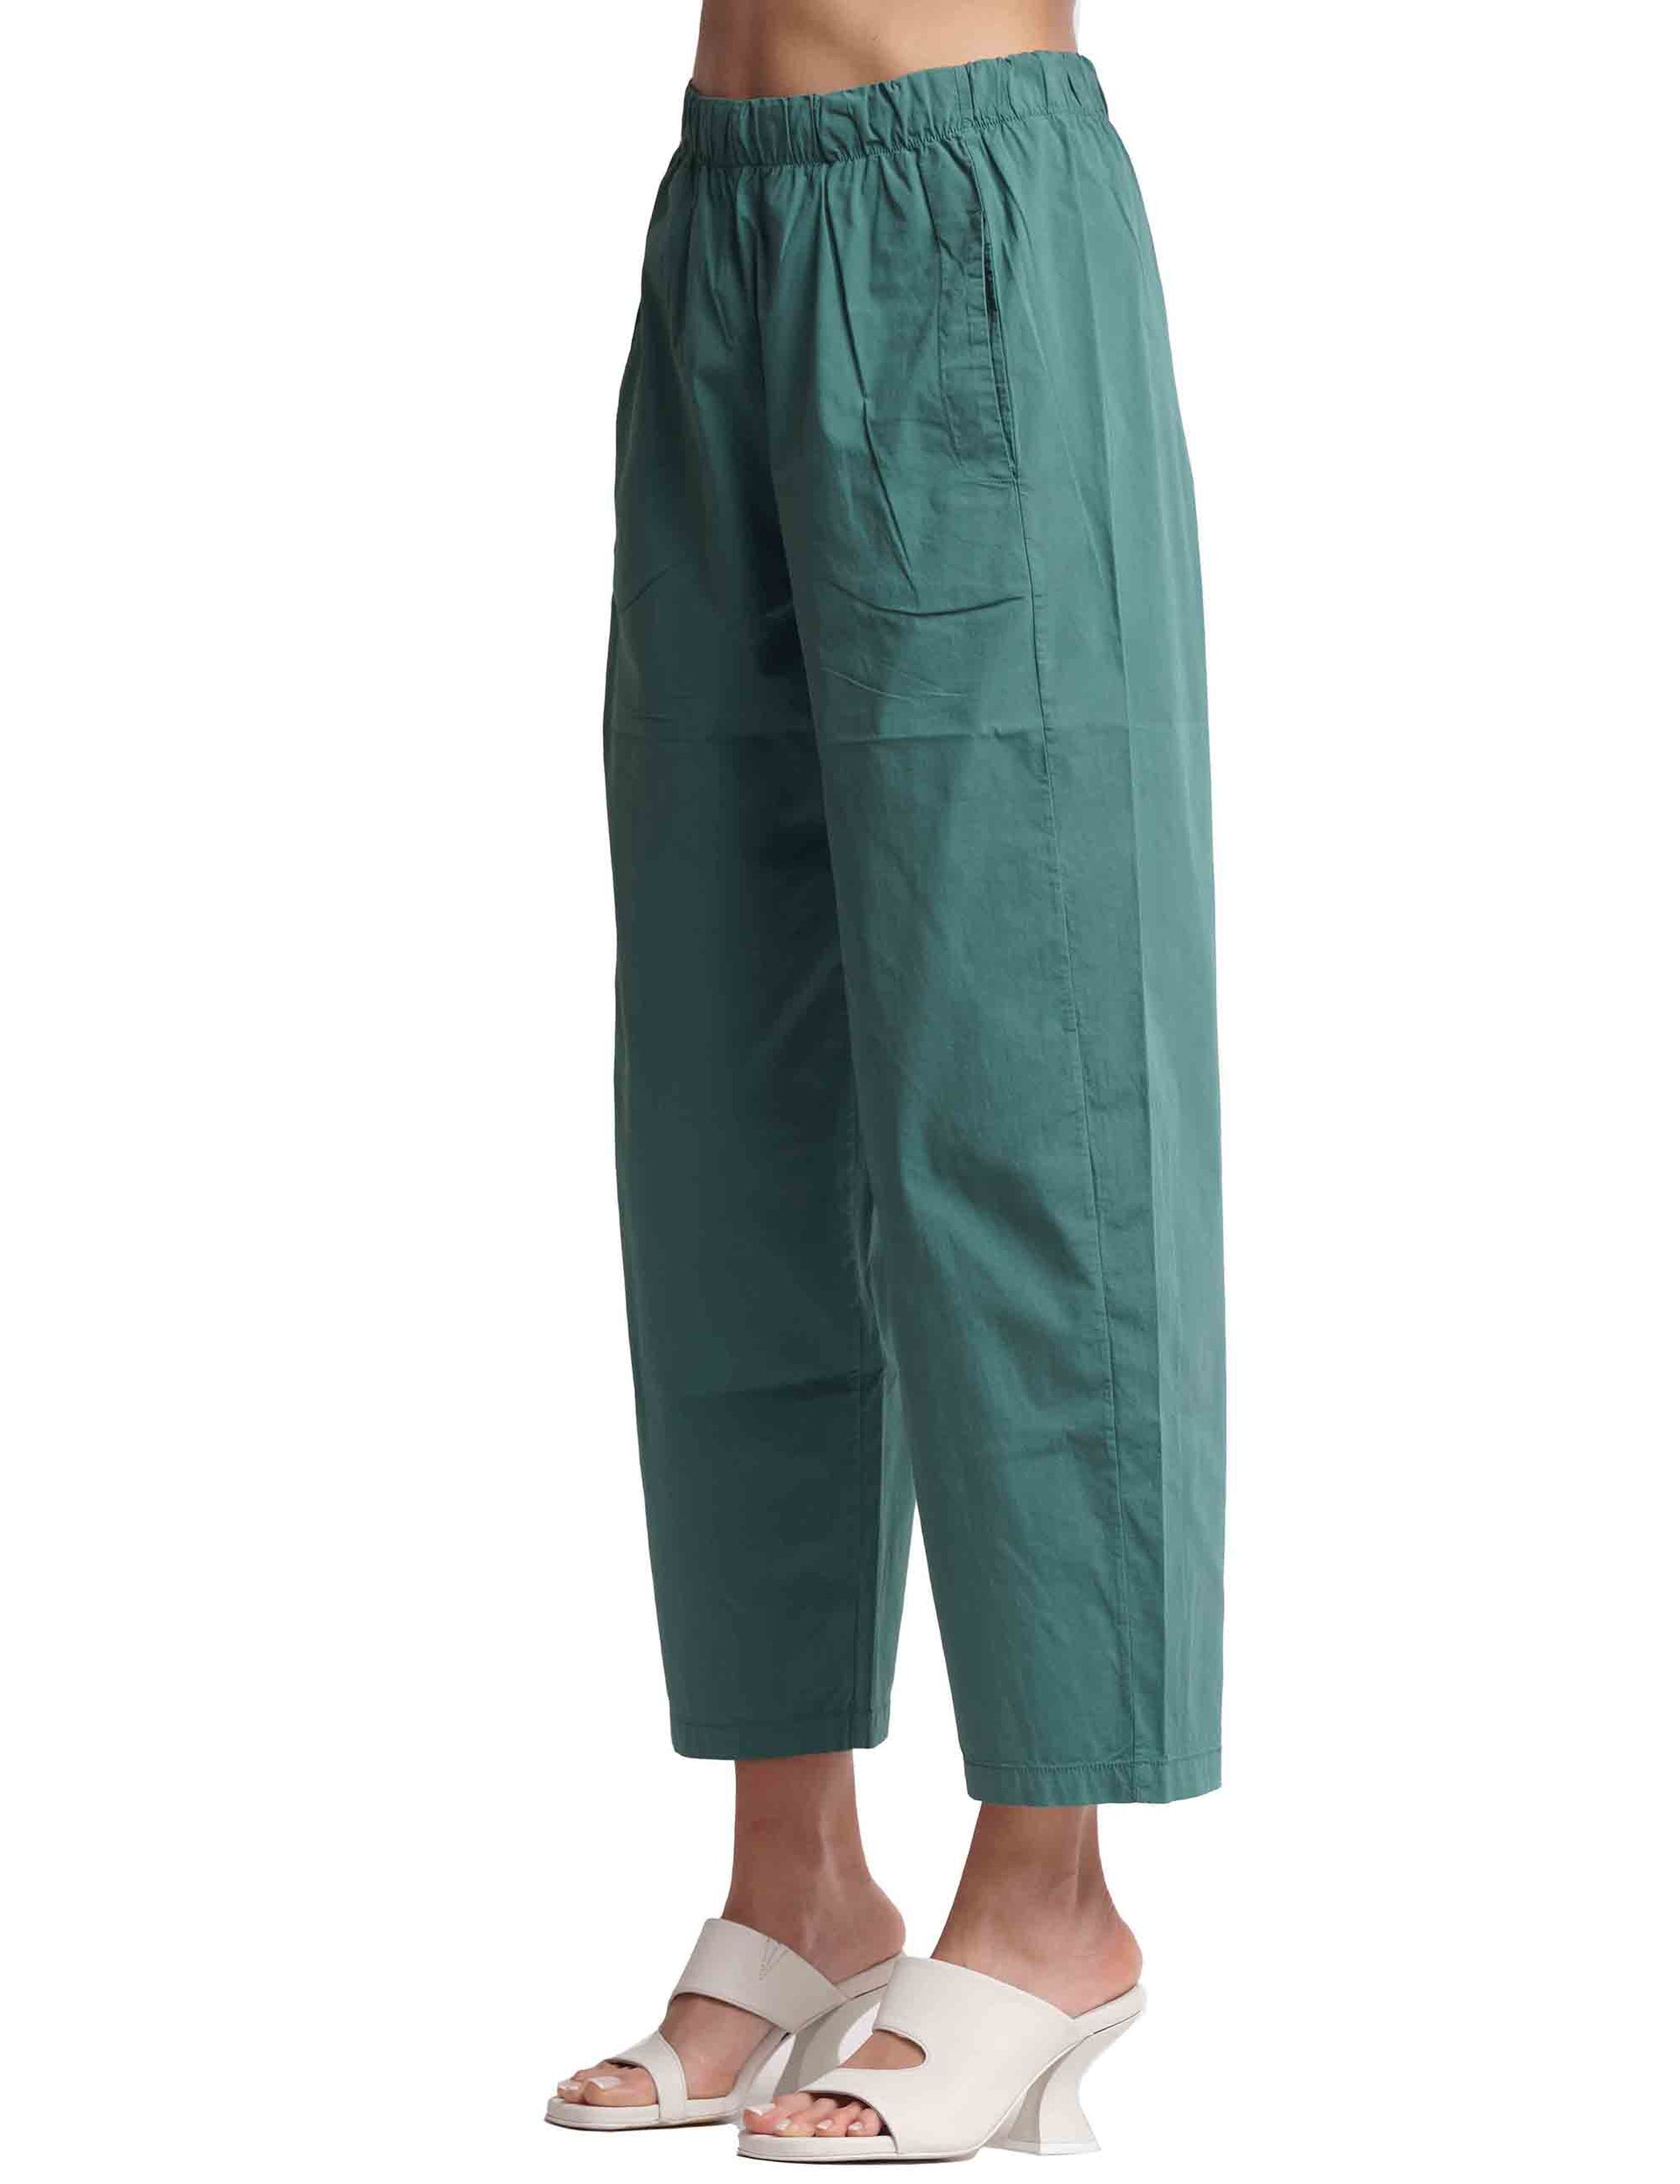 Women's green cotton trousers with elastic waist